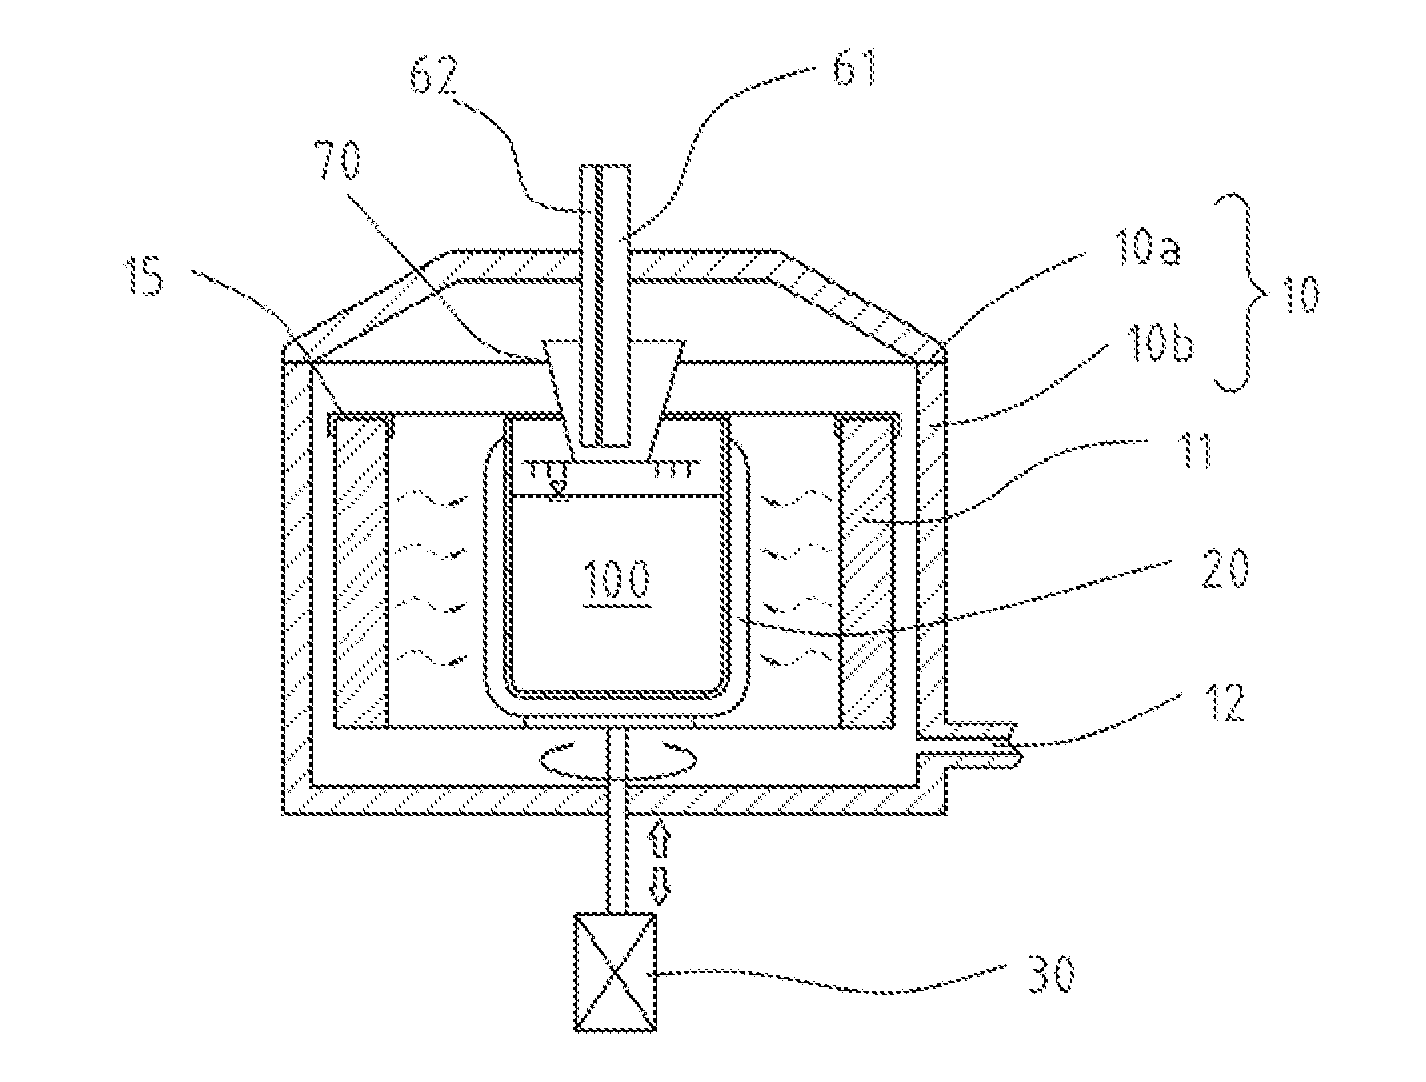 Apparatus for purifying metallurgical silicon for solar cells